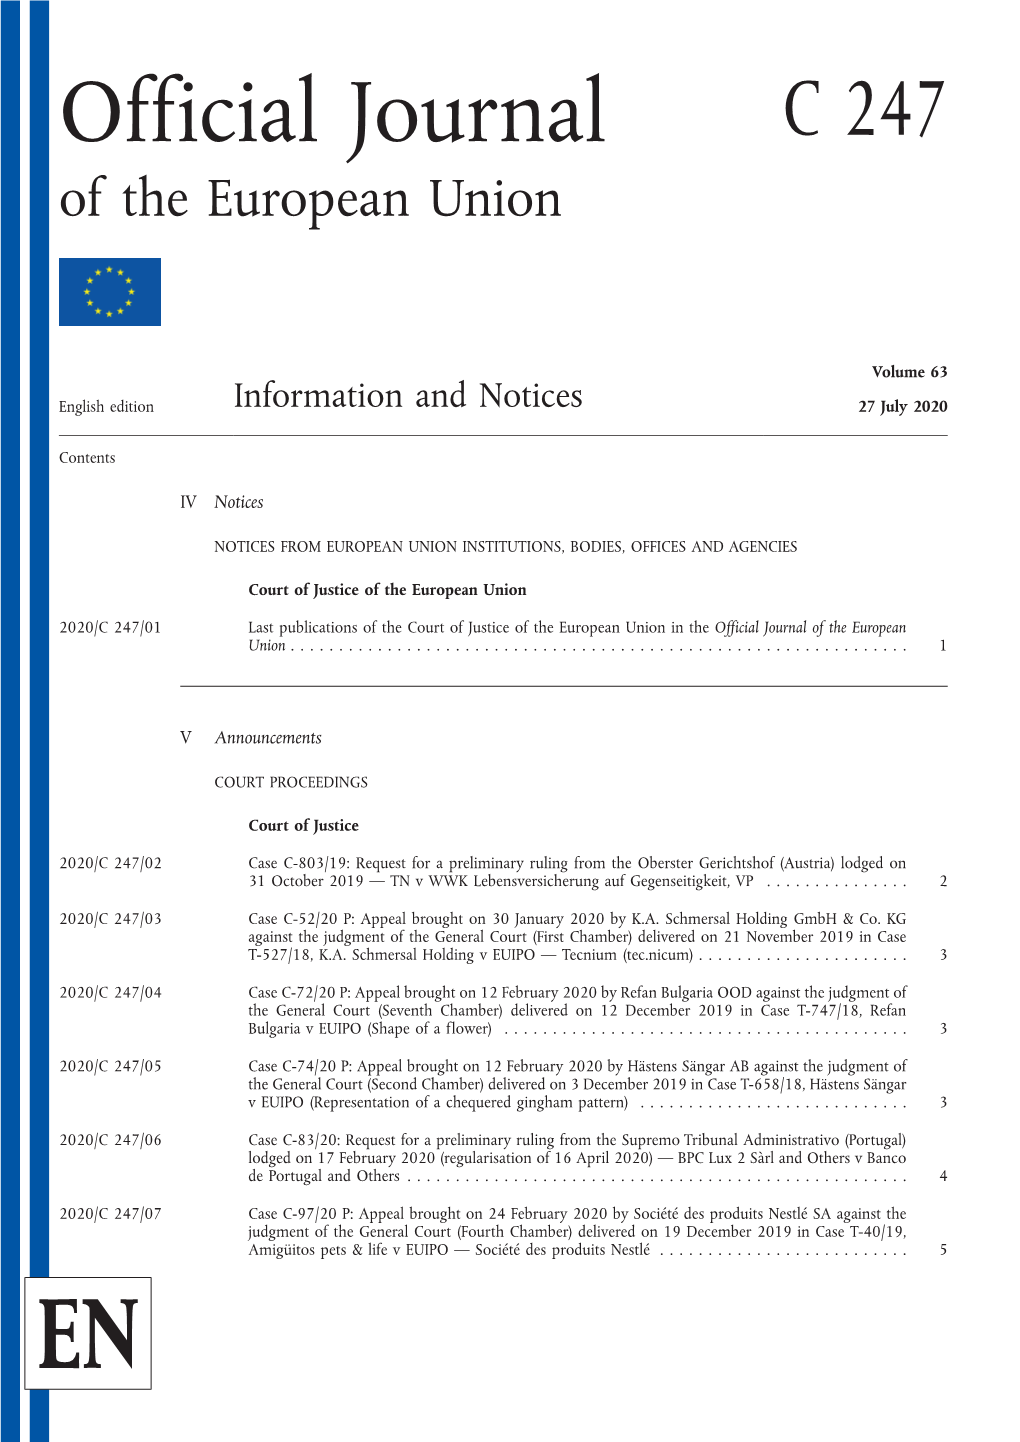 Official Journal of the European Union